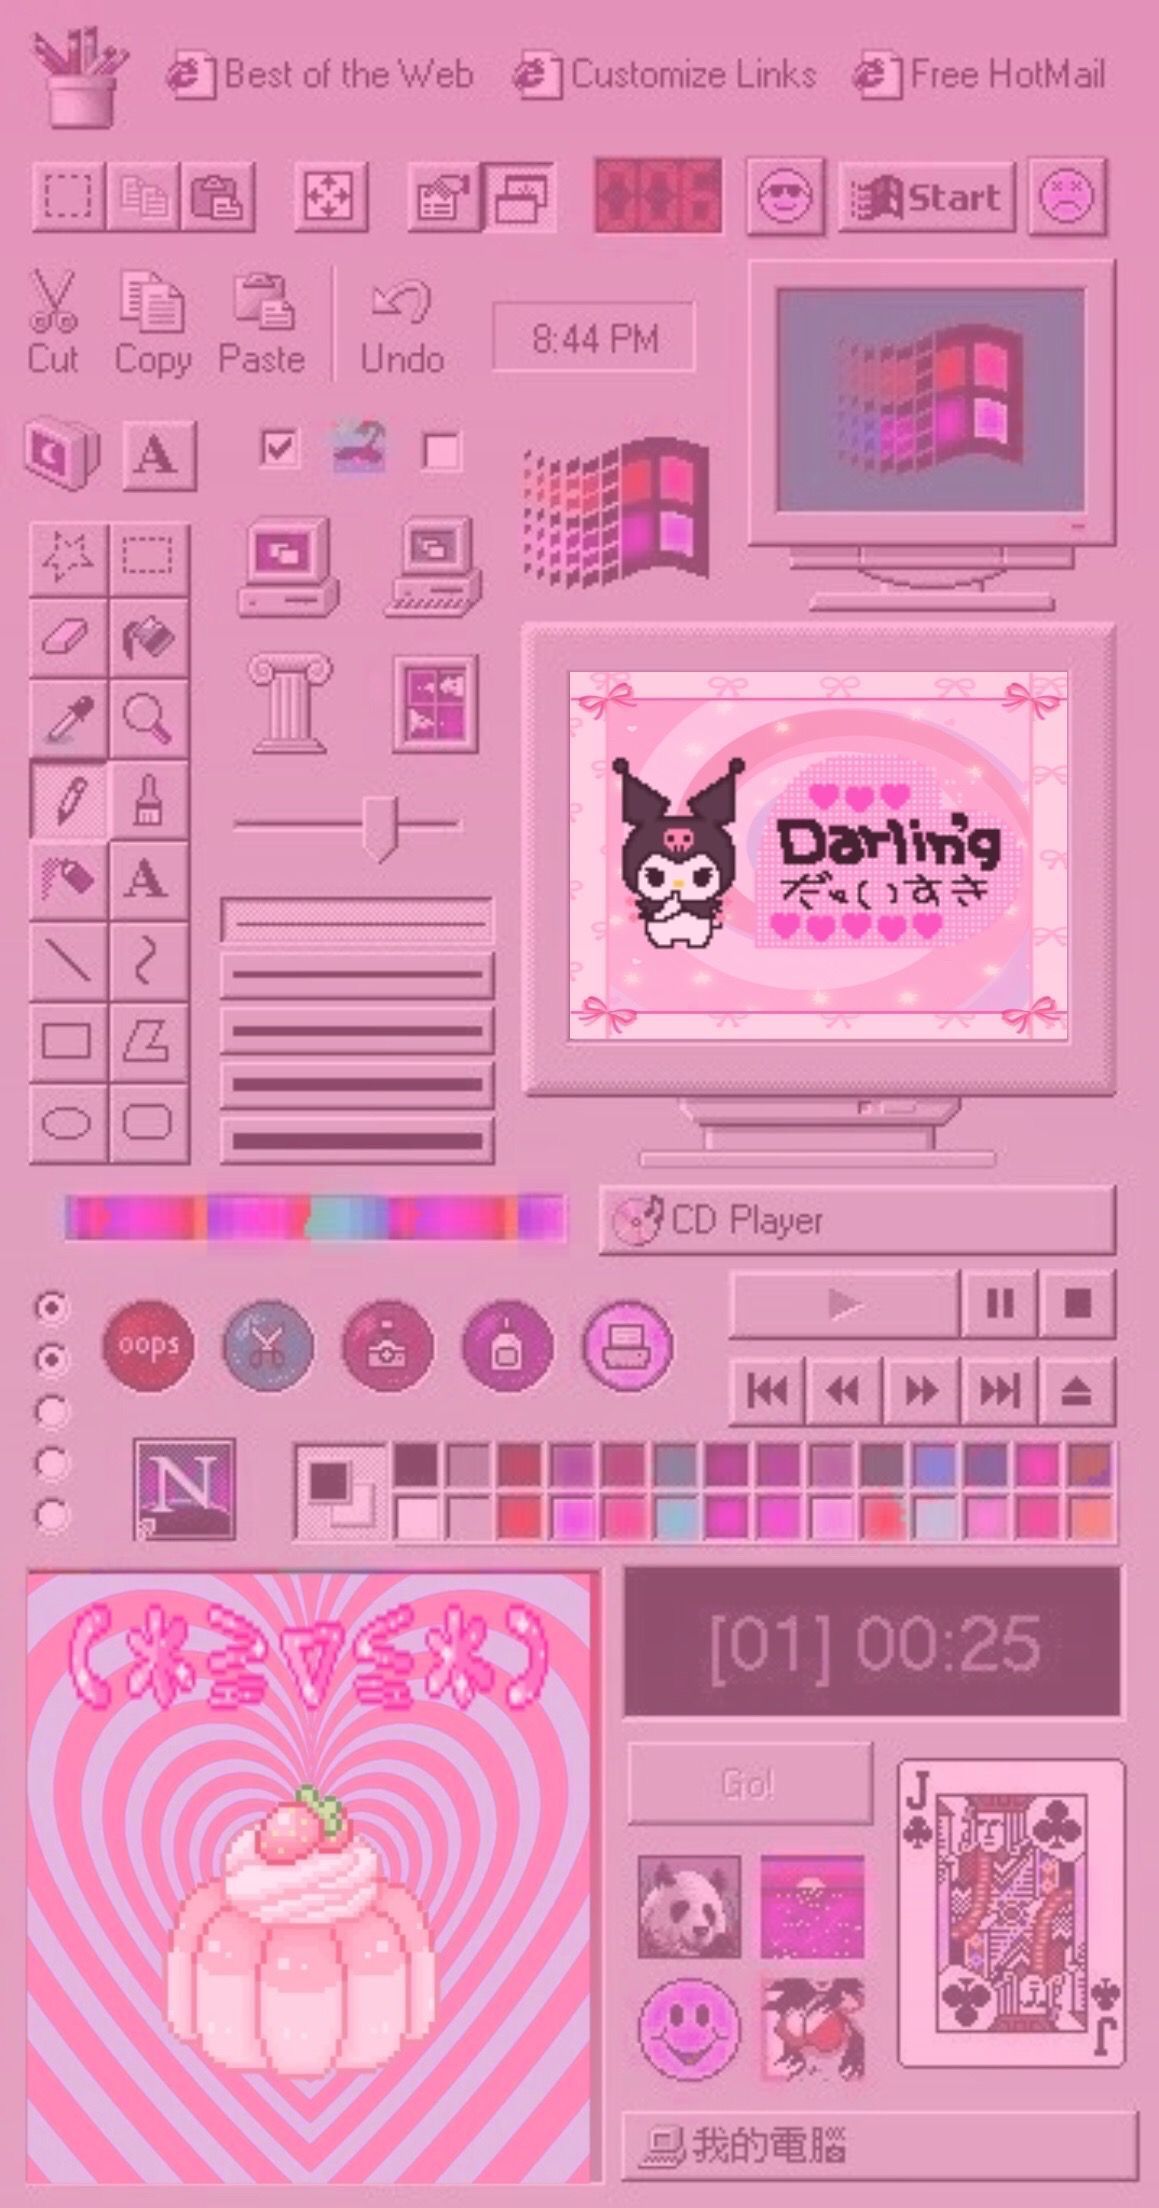 A pink computer screen with various icons and buttons - Traumacore